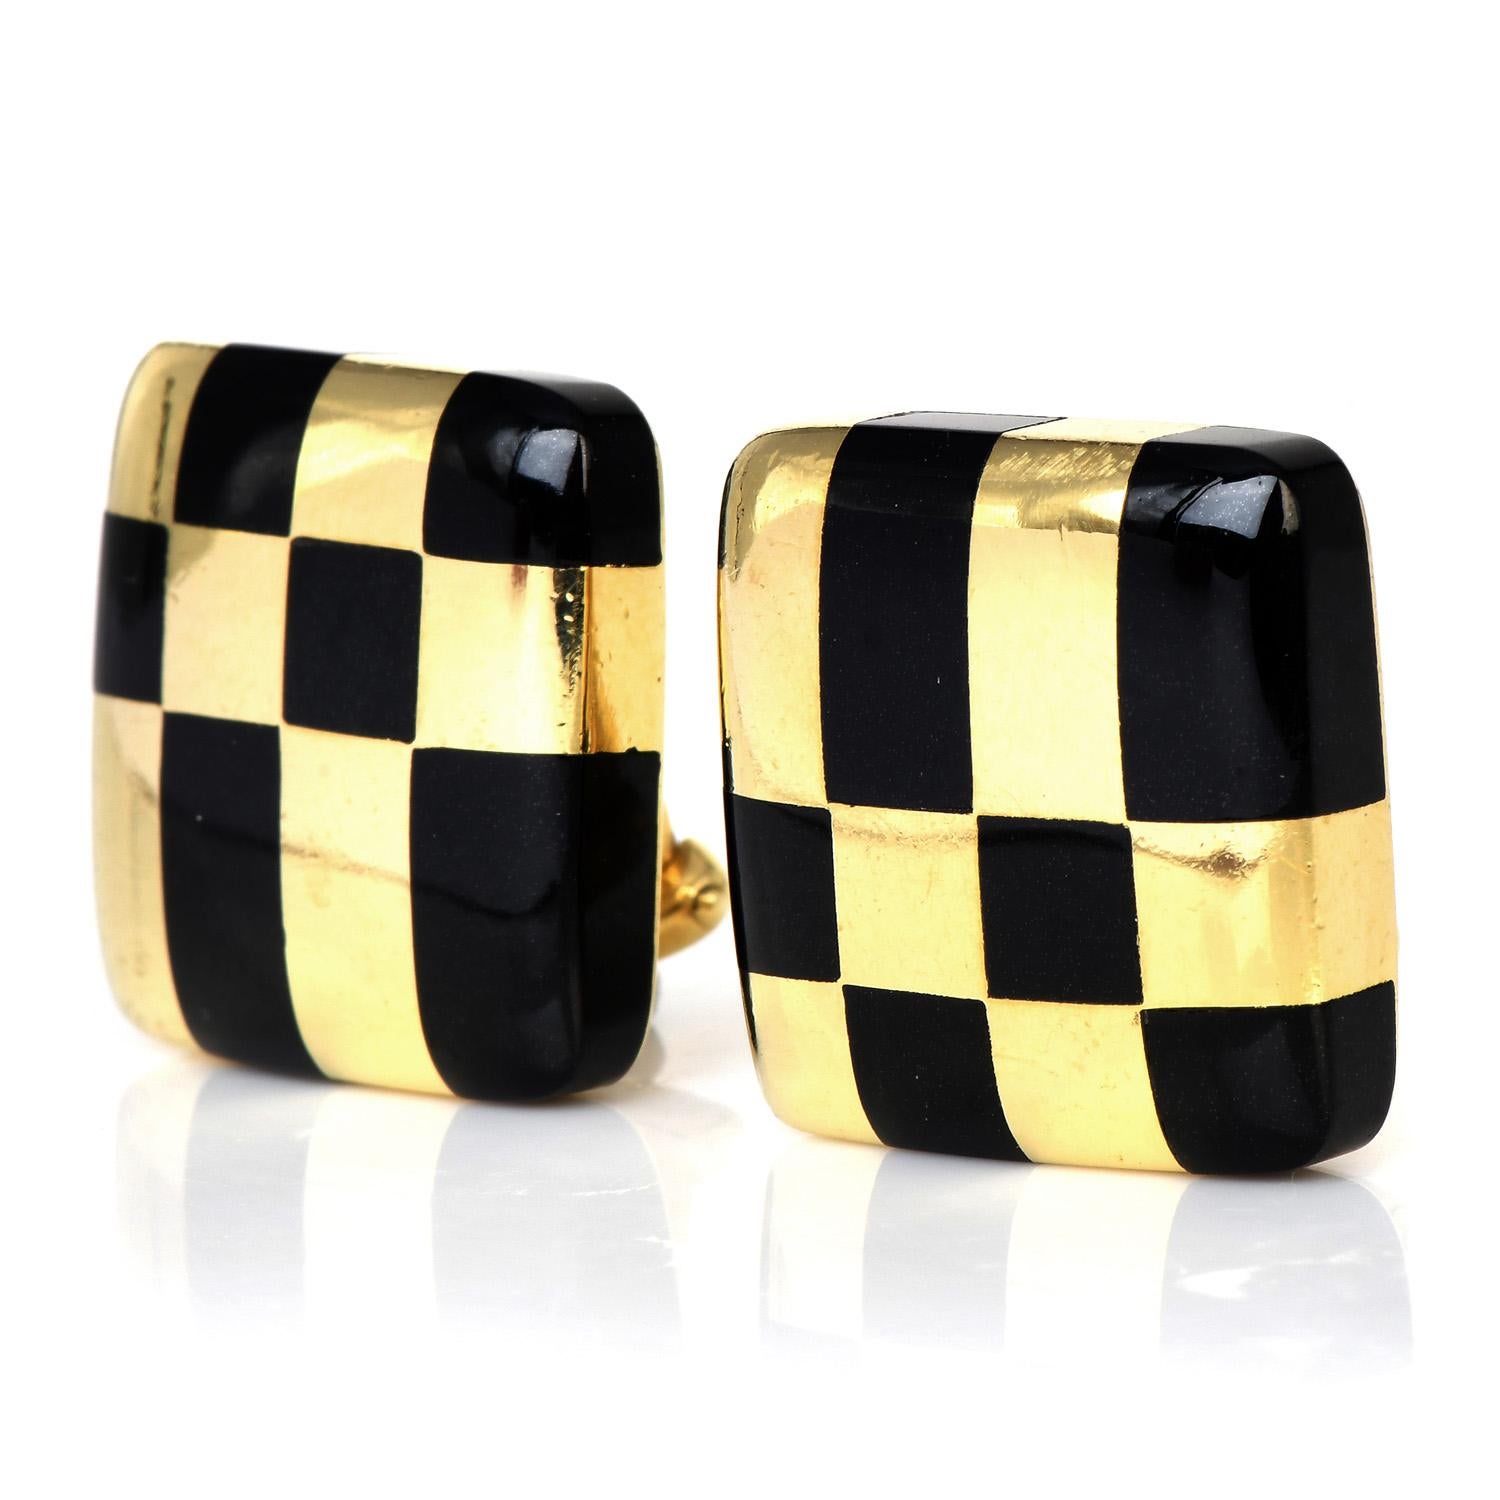 These fashionable Tiffany & Co. from the designer Angela Cummings,

a classic & desirable look from 1982.

They are crafted in solid 18k yellow gold, embellished with inlay style Black Jade stones, creating a checkerboard pattern with the high